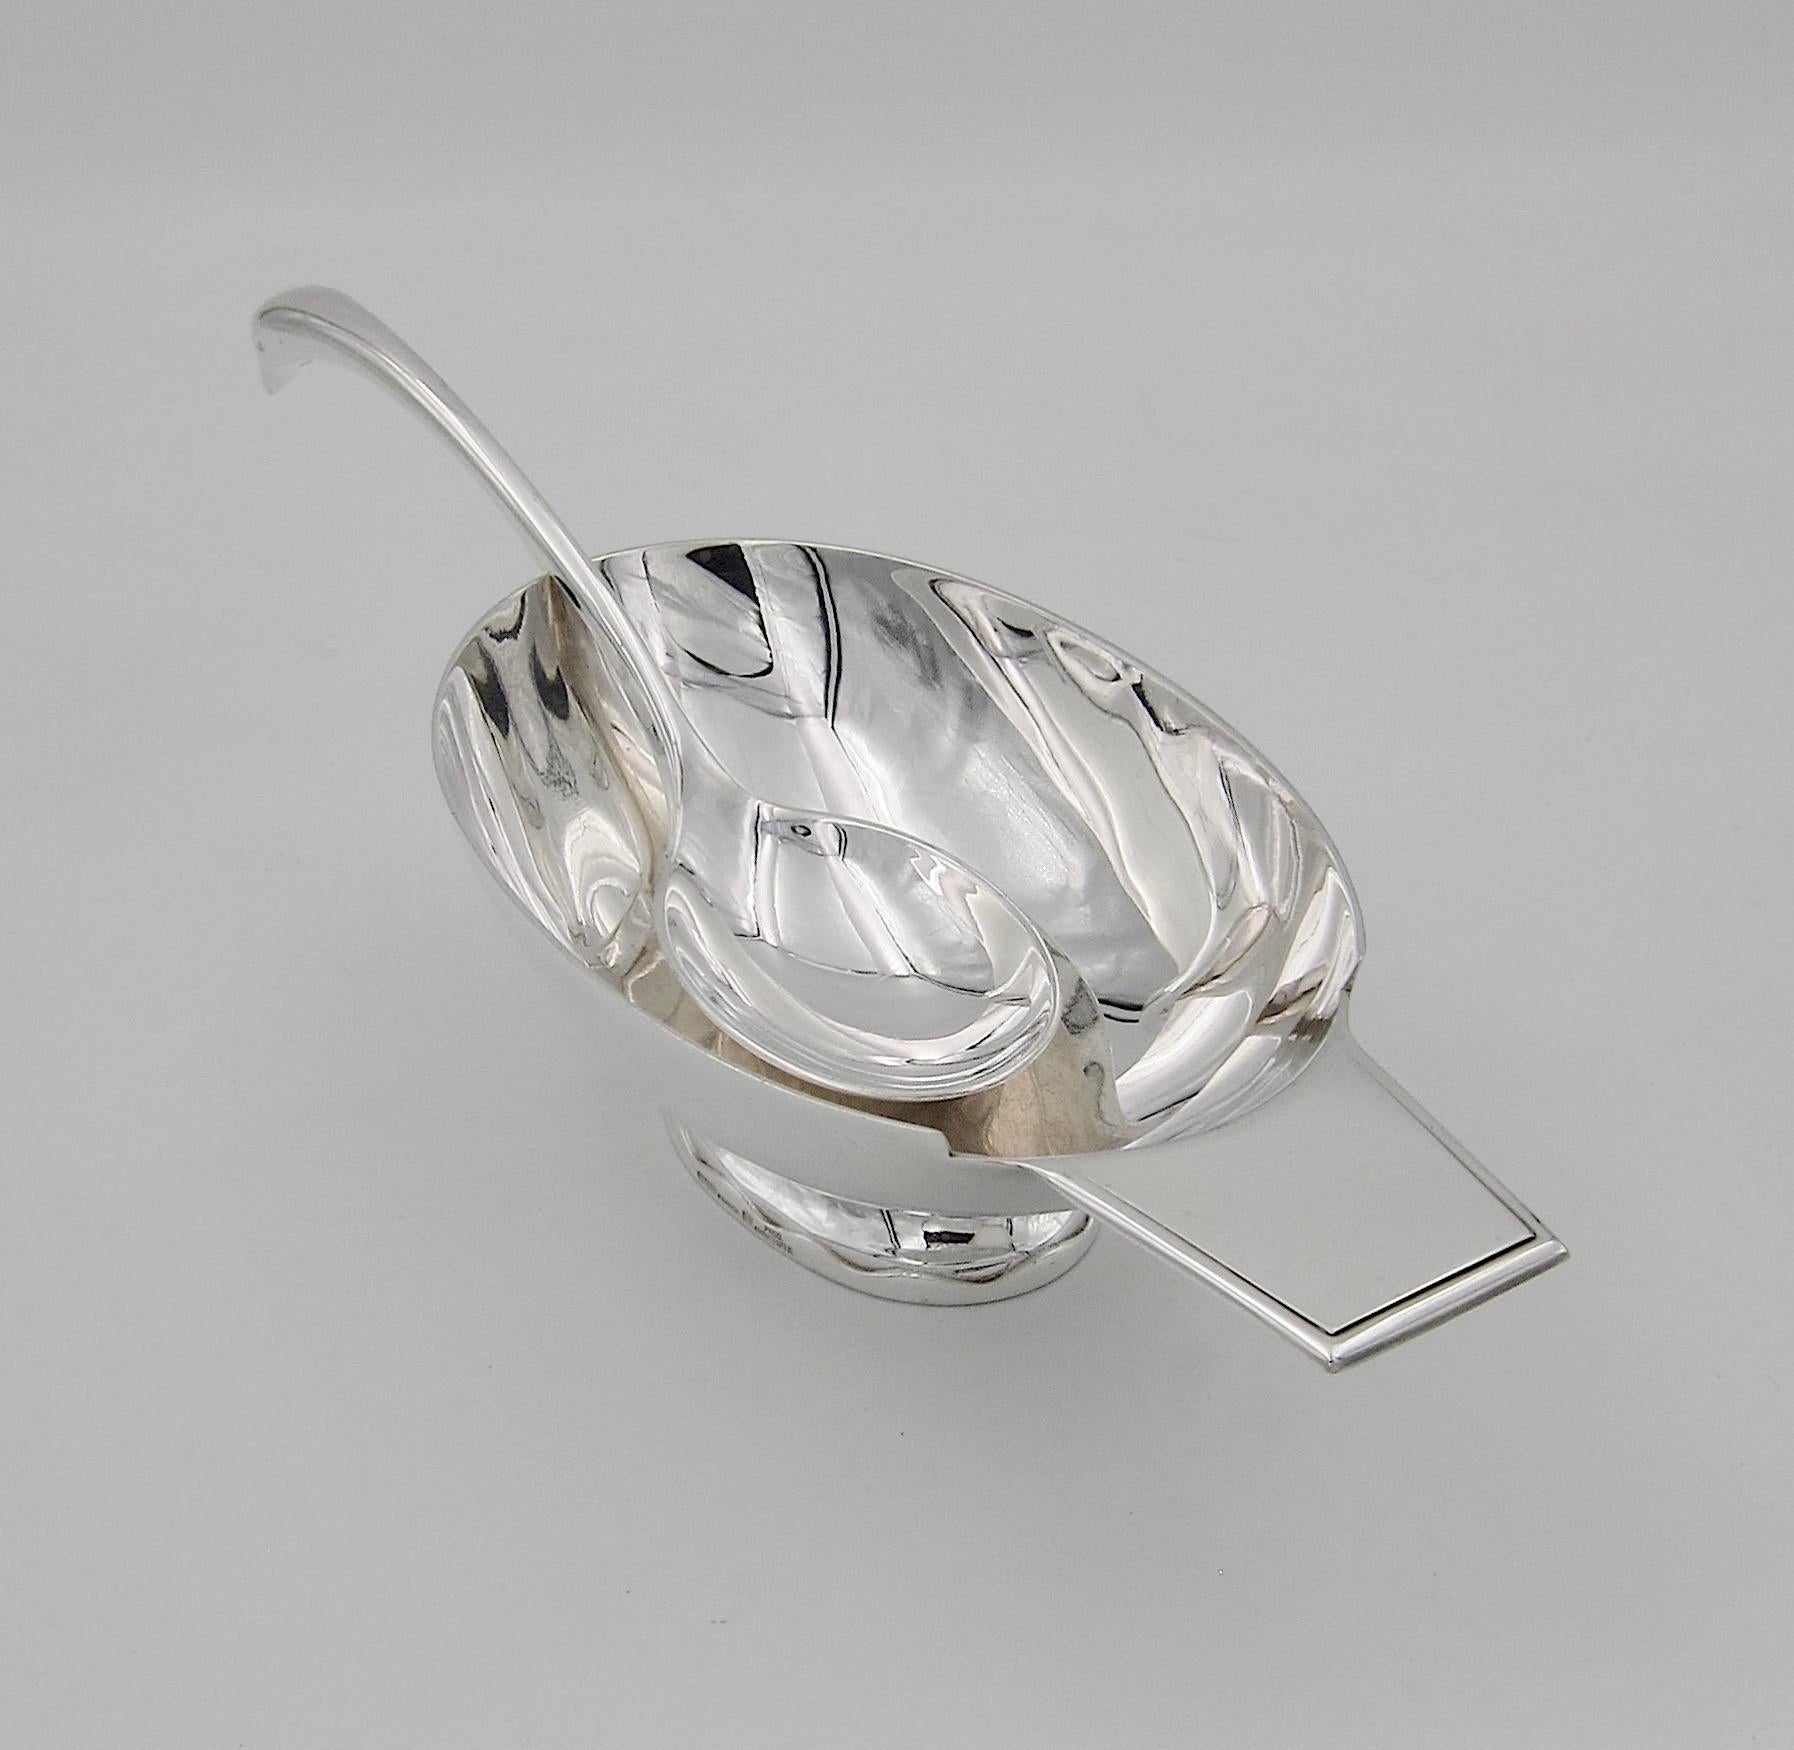 20th Century French Christofle Gallia Art Deco Swan Sauce Boat by Christian Fjerdingstad